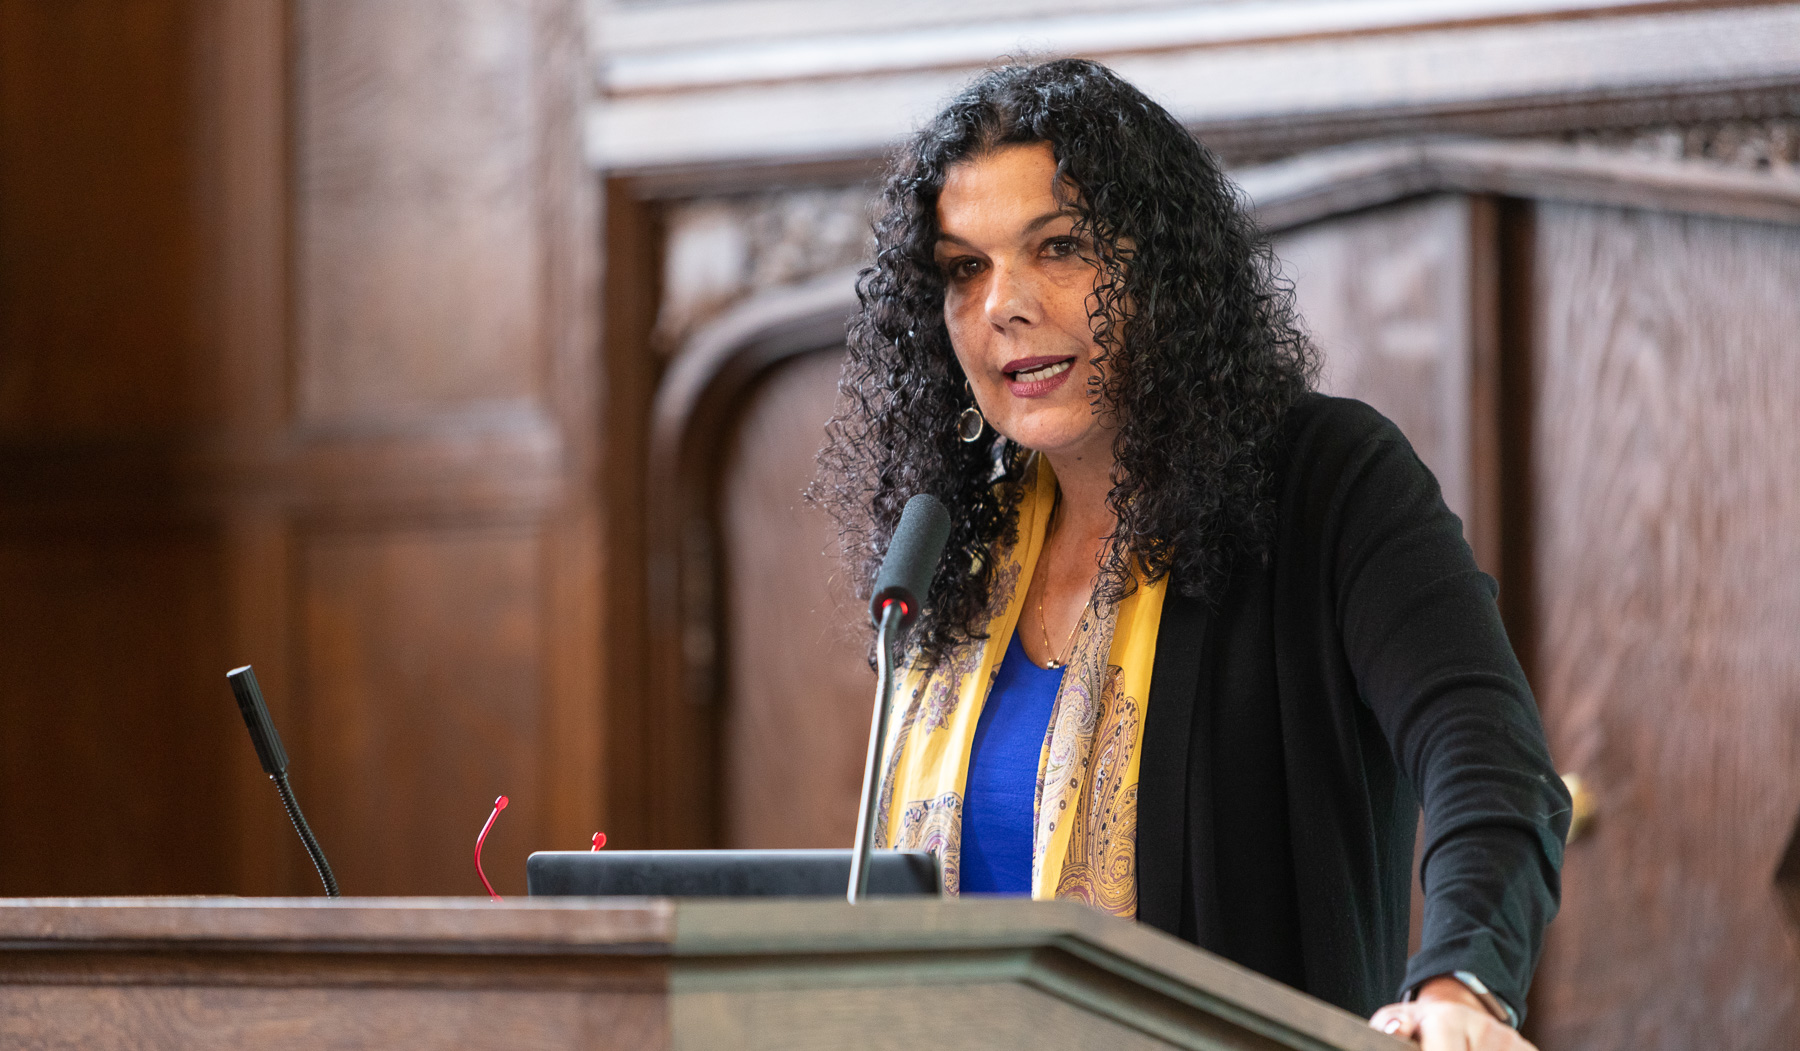 Salma Ghanem, acting provost, offered welcoming remarks. (DePaul University/Jeff Carrion)